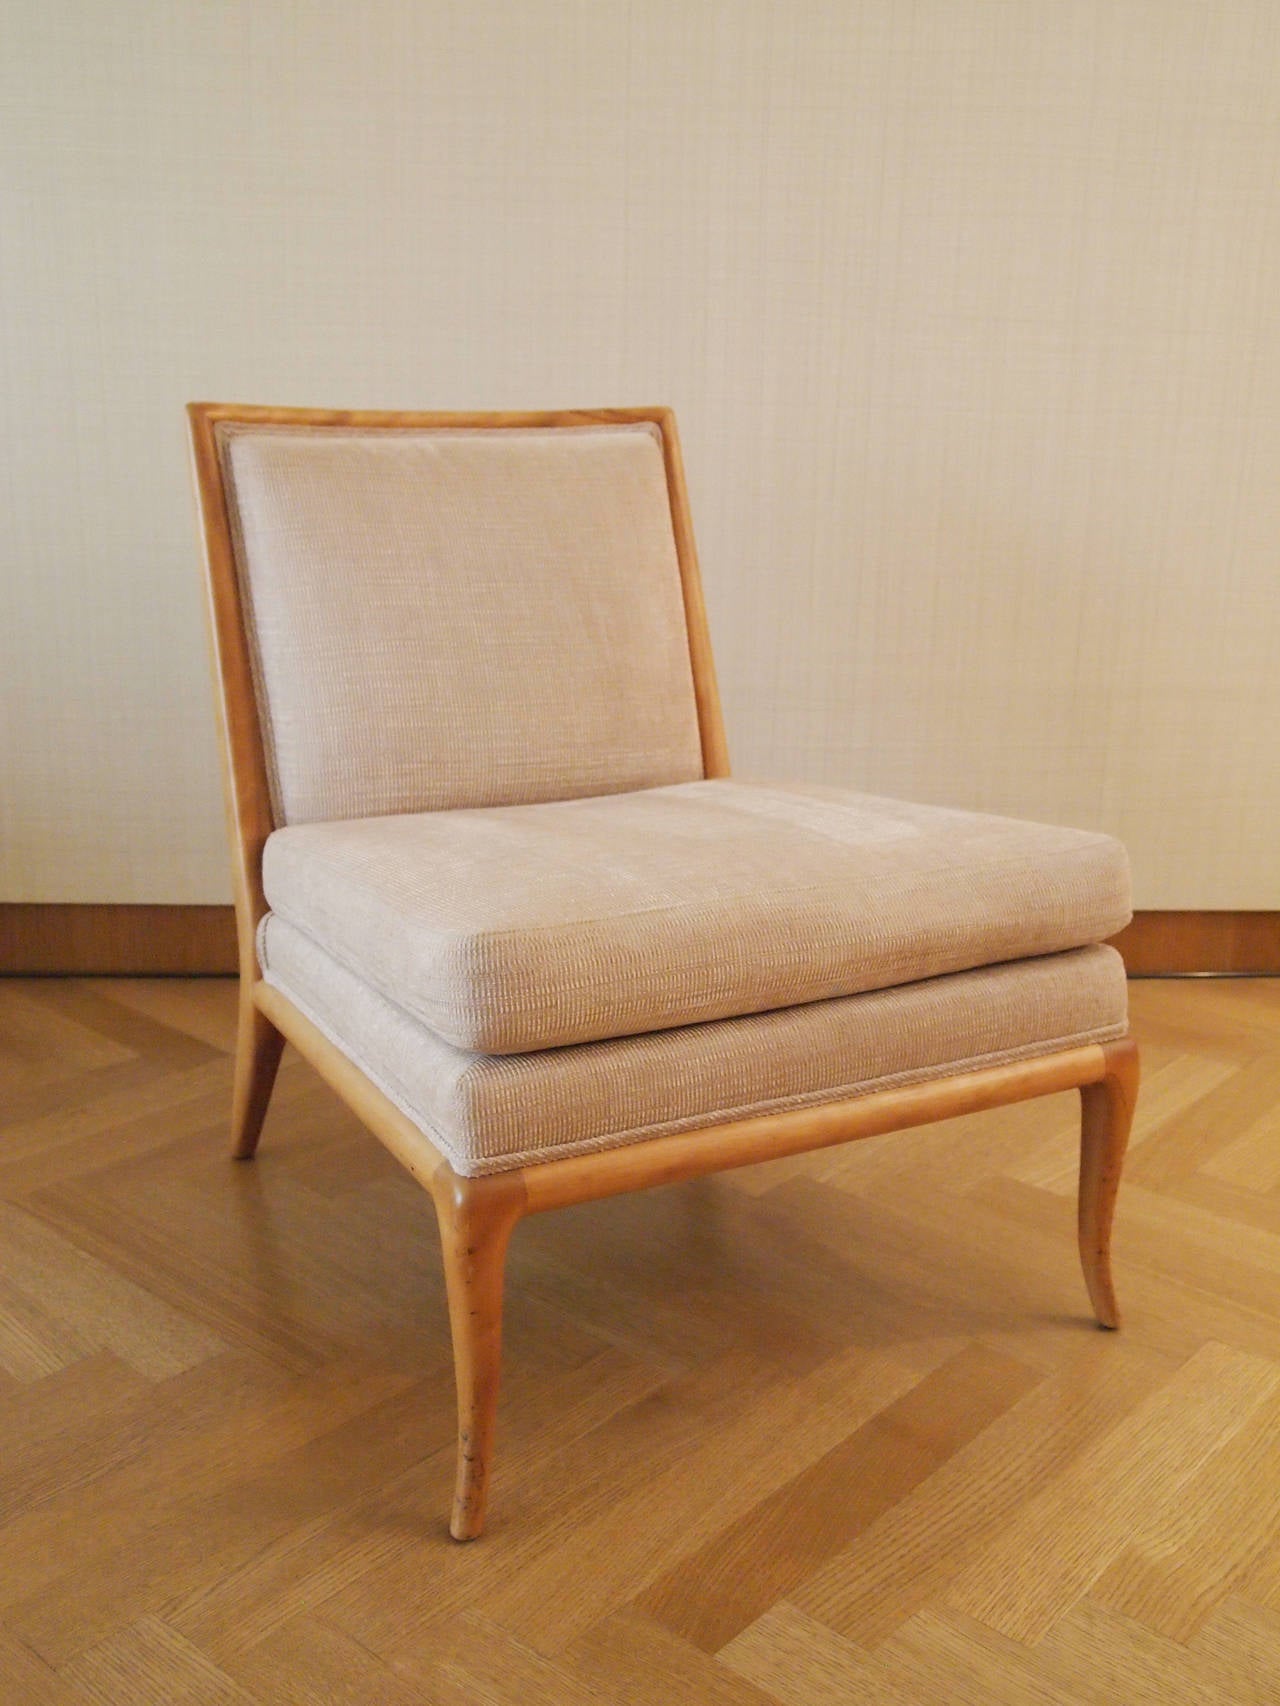 A rare settee and matching slipper chair by T.H. Robsjohn-Gibbings, manufactured by American maker Widdicomb Furniture Co. 

Neutral stone-coloured fabric over bleached mahogany, clean mid-century lines with a small cabriolet leg. The settee is an